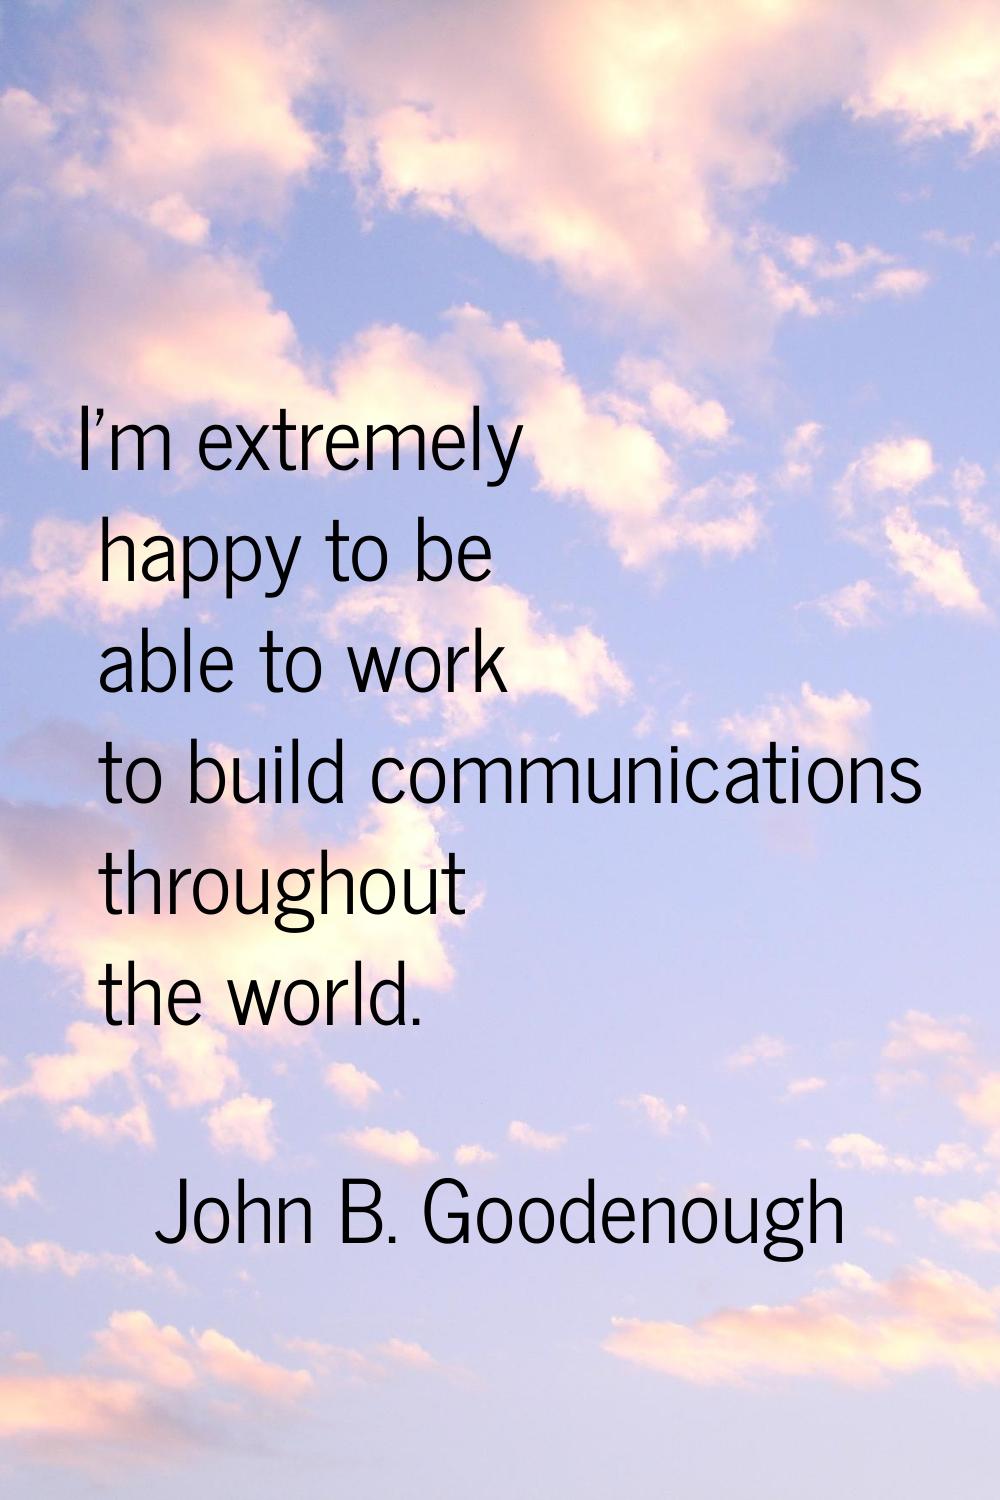 I'm extremely happy to be able to work to build communications throughout the world.